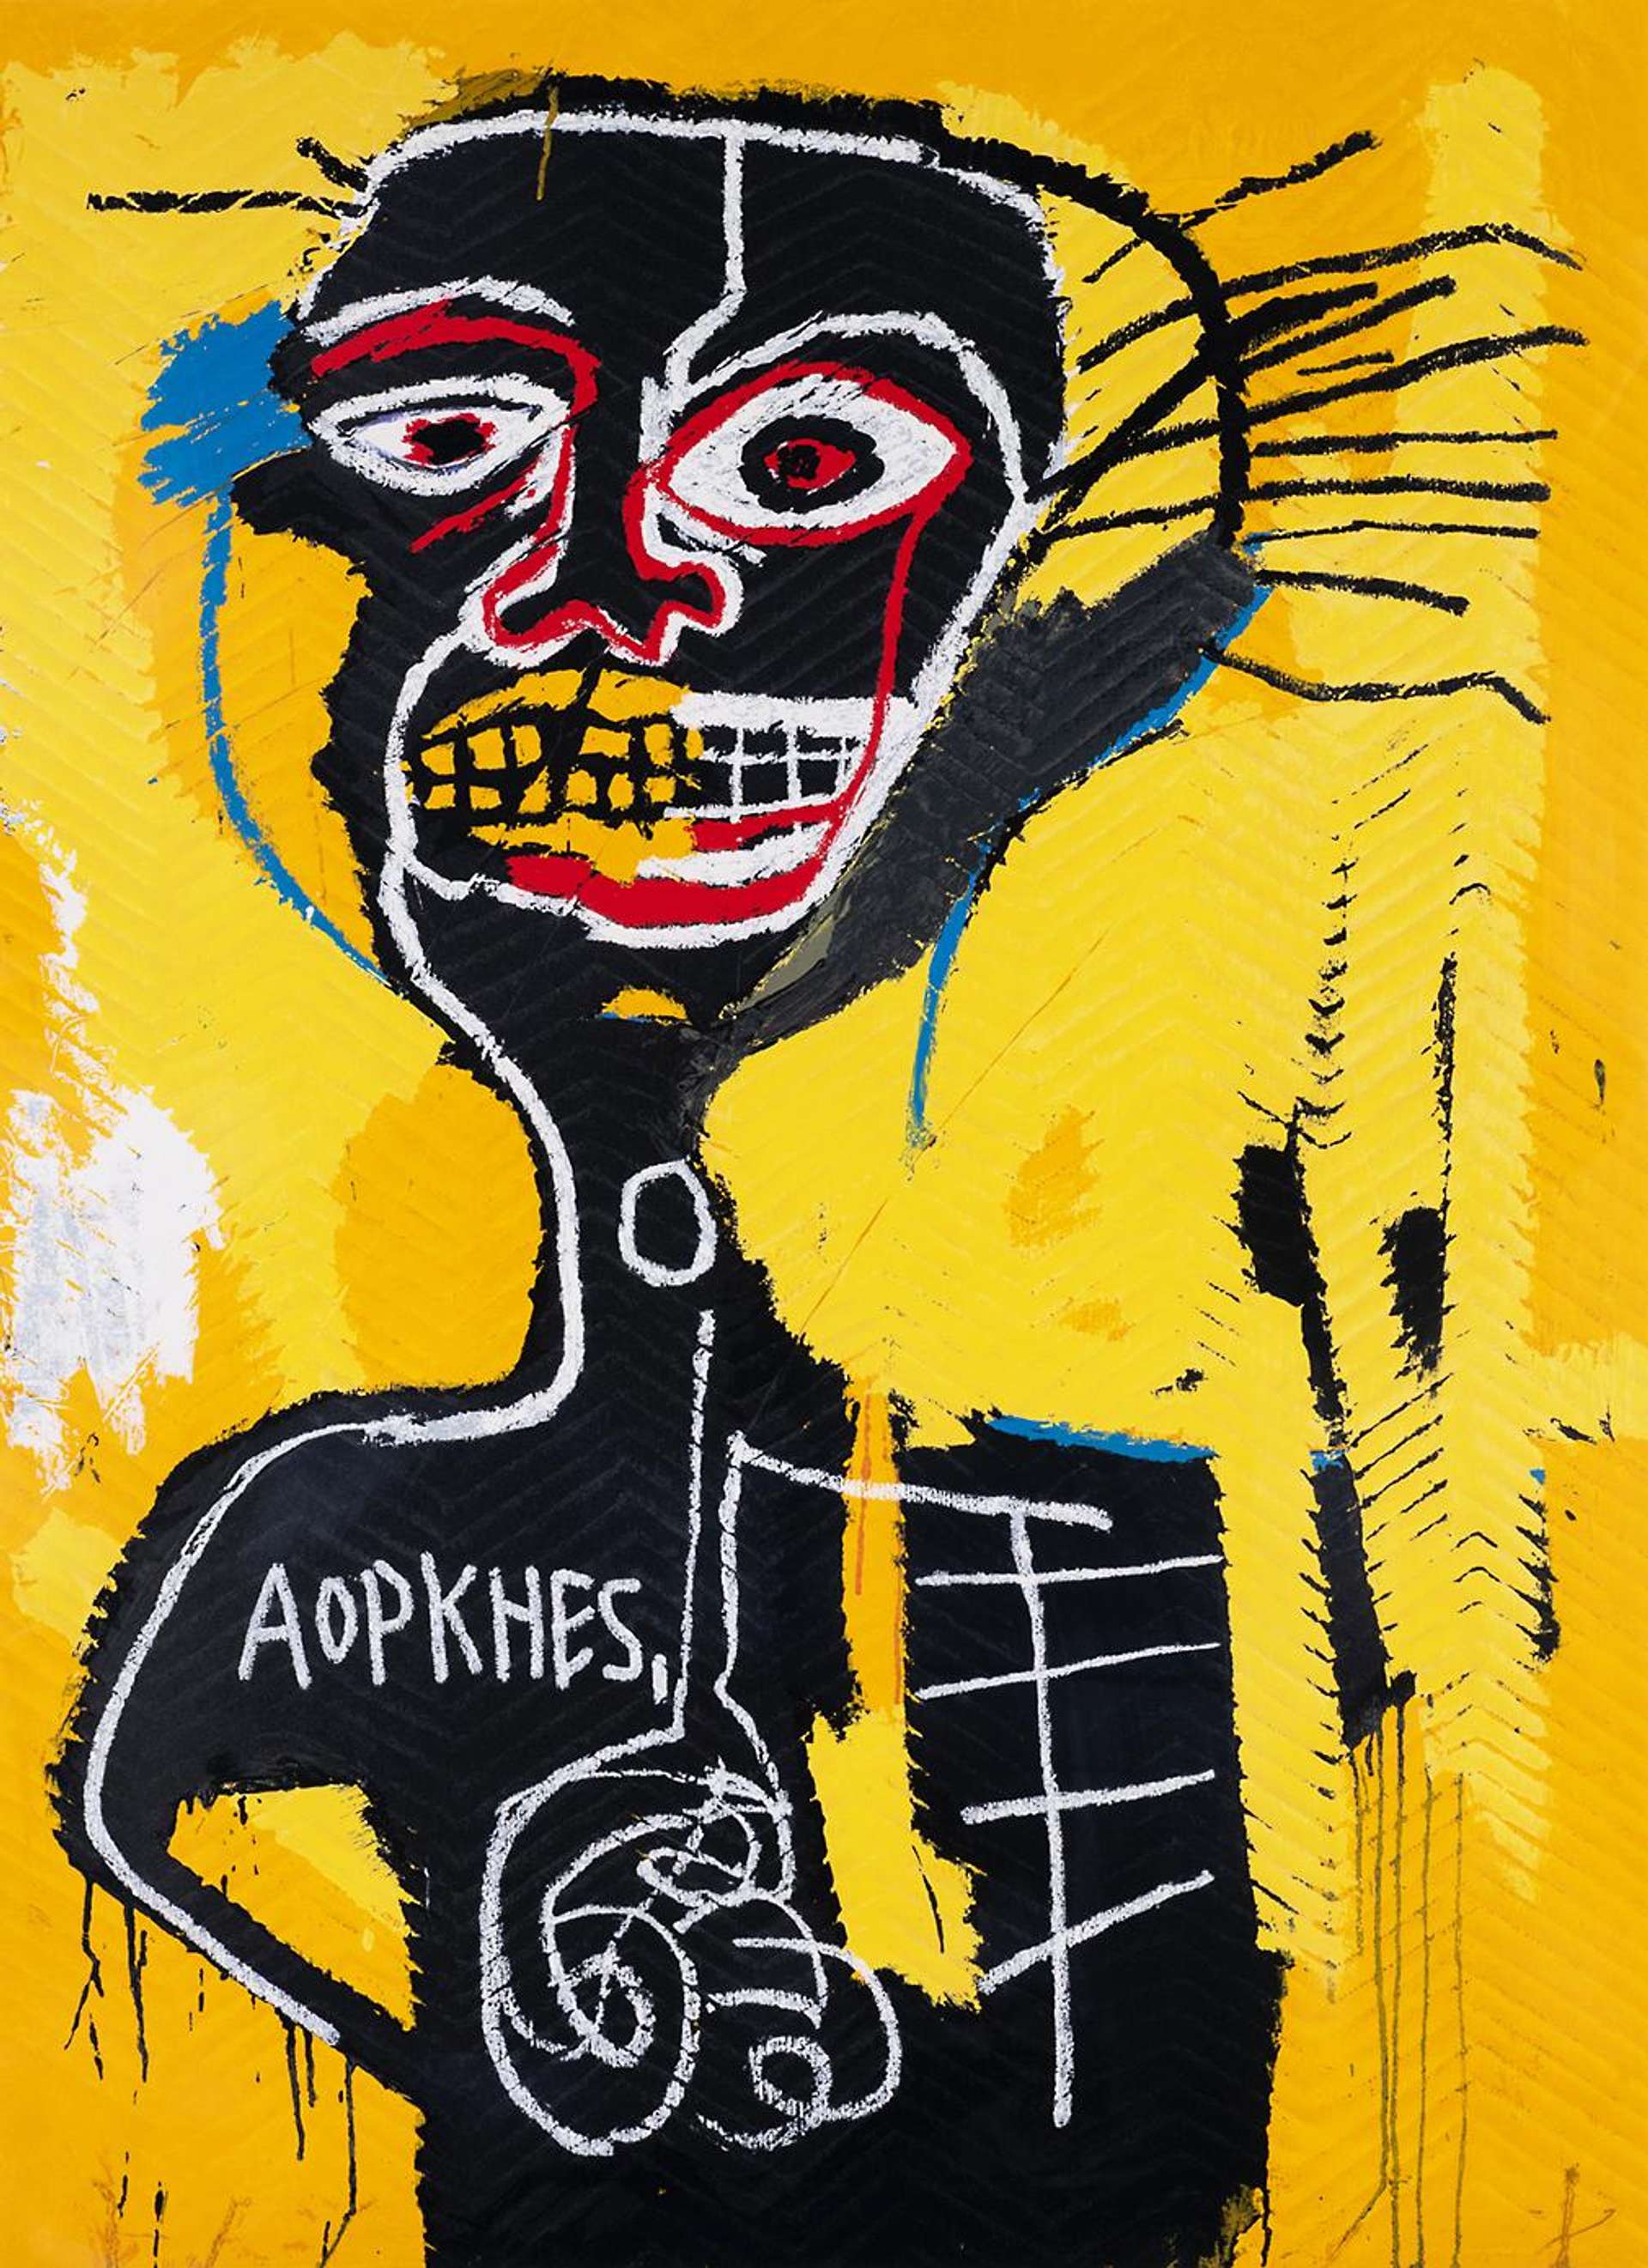 A screenprint by Jean-Michel Basquiat depicting a black figure against a bright yellow background.